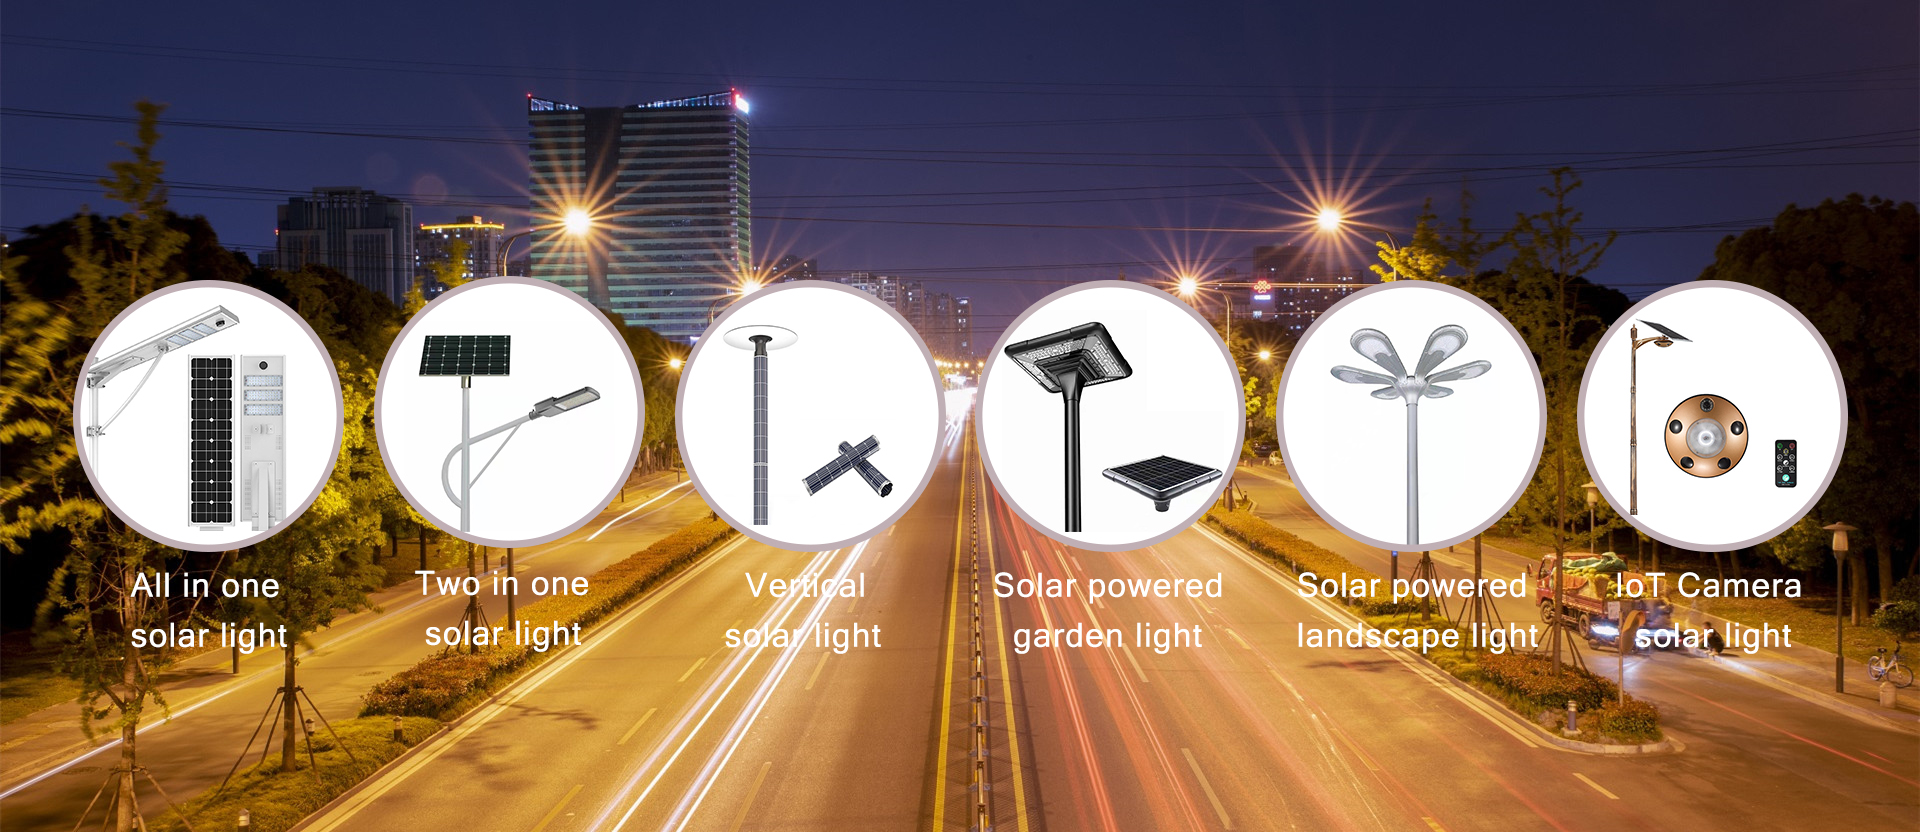 Featured Solar lighting products